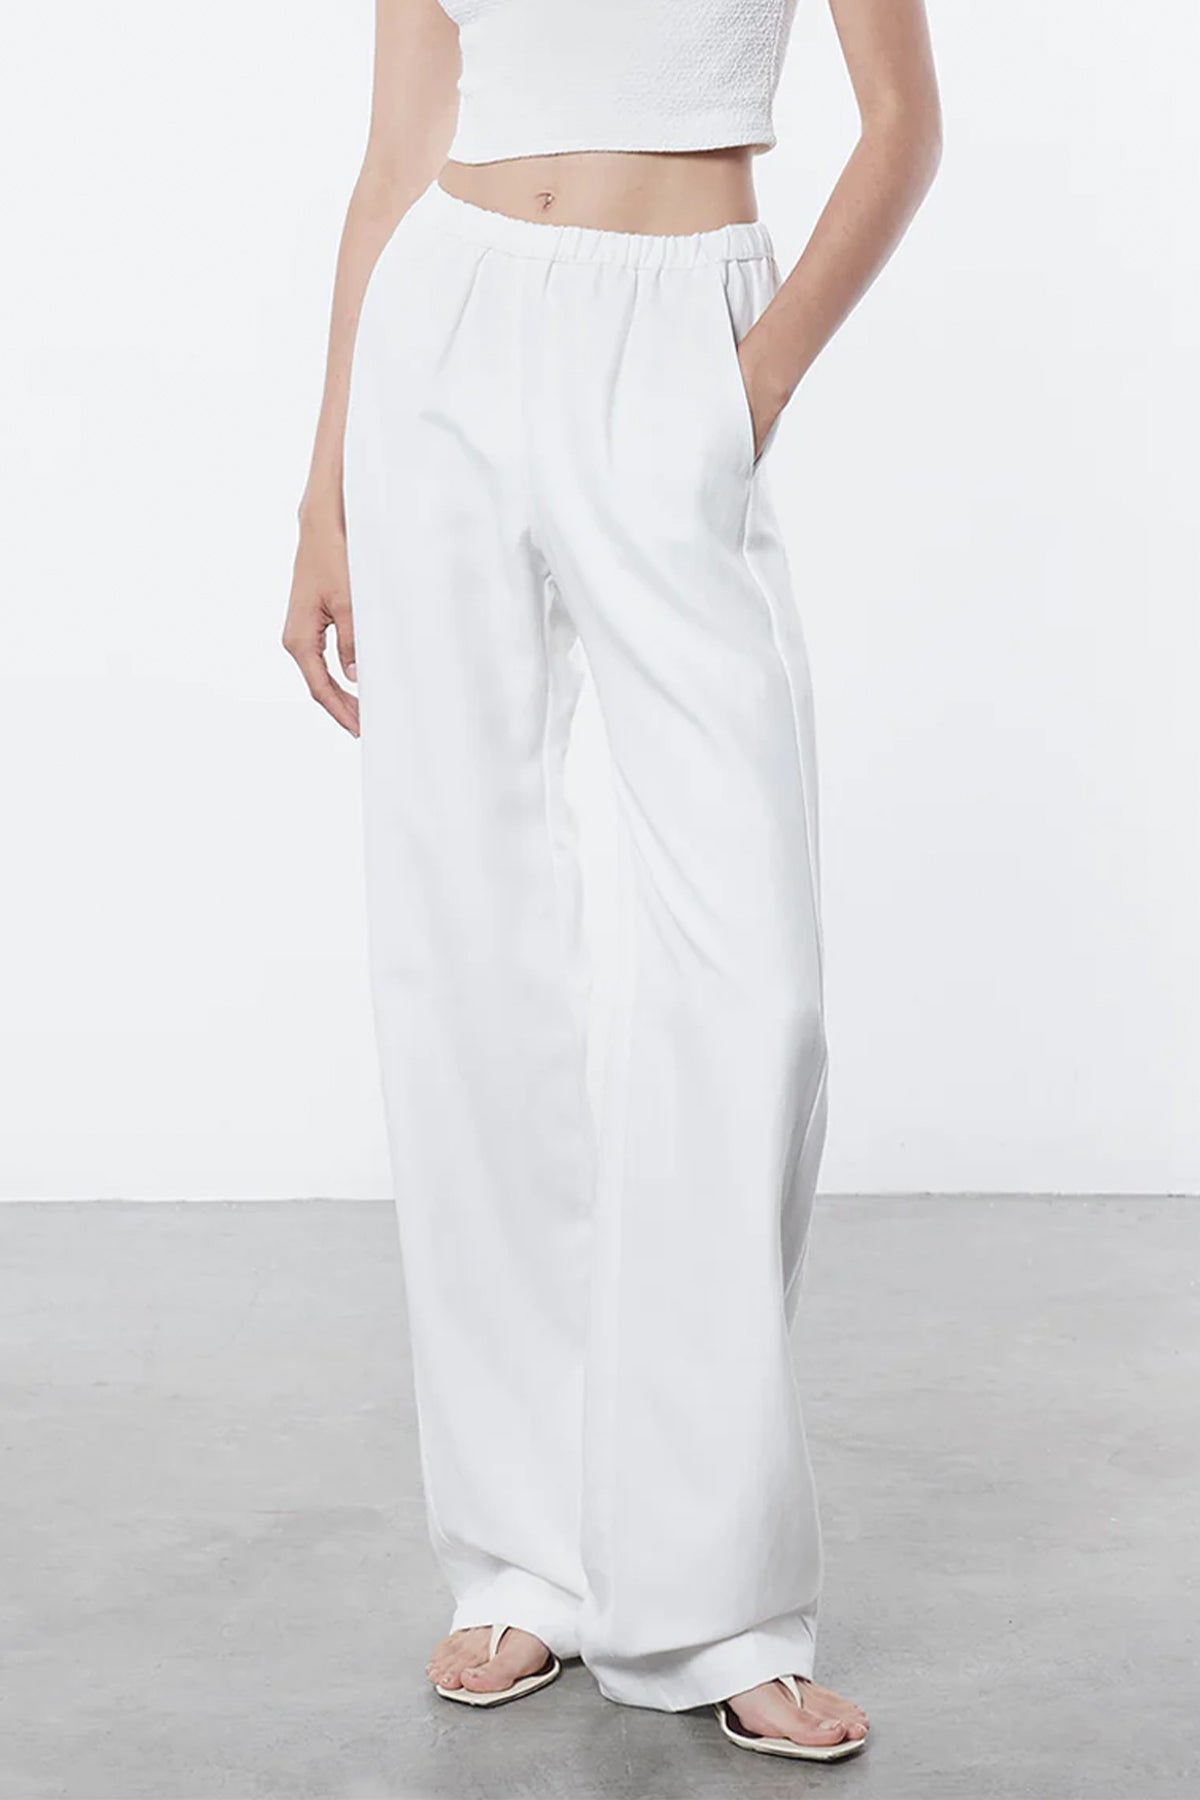 Twill Everywhere Pant in Off-White - shop-olivia.com